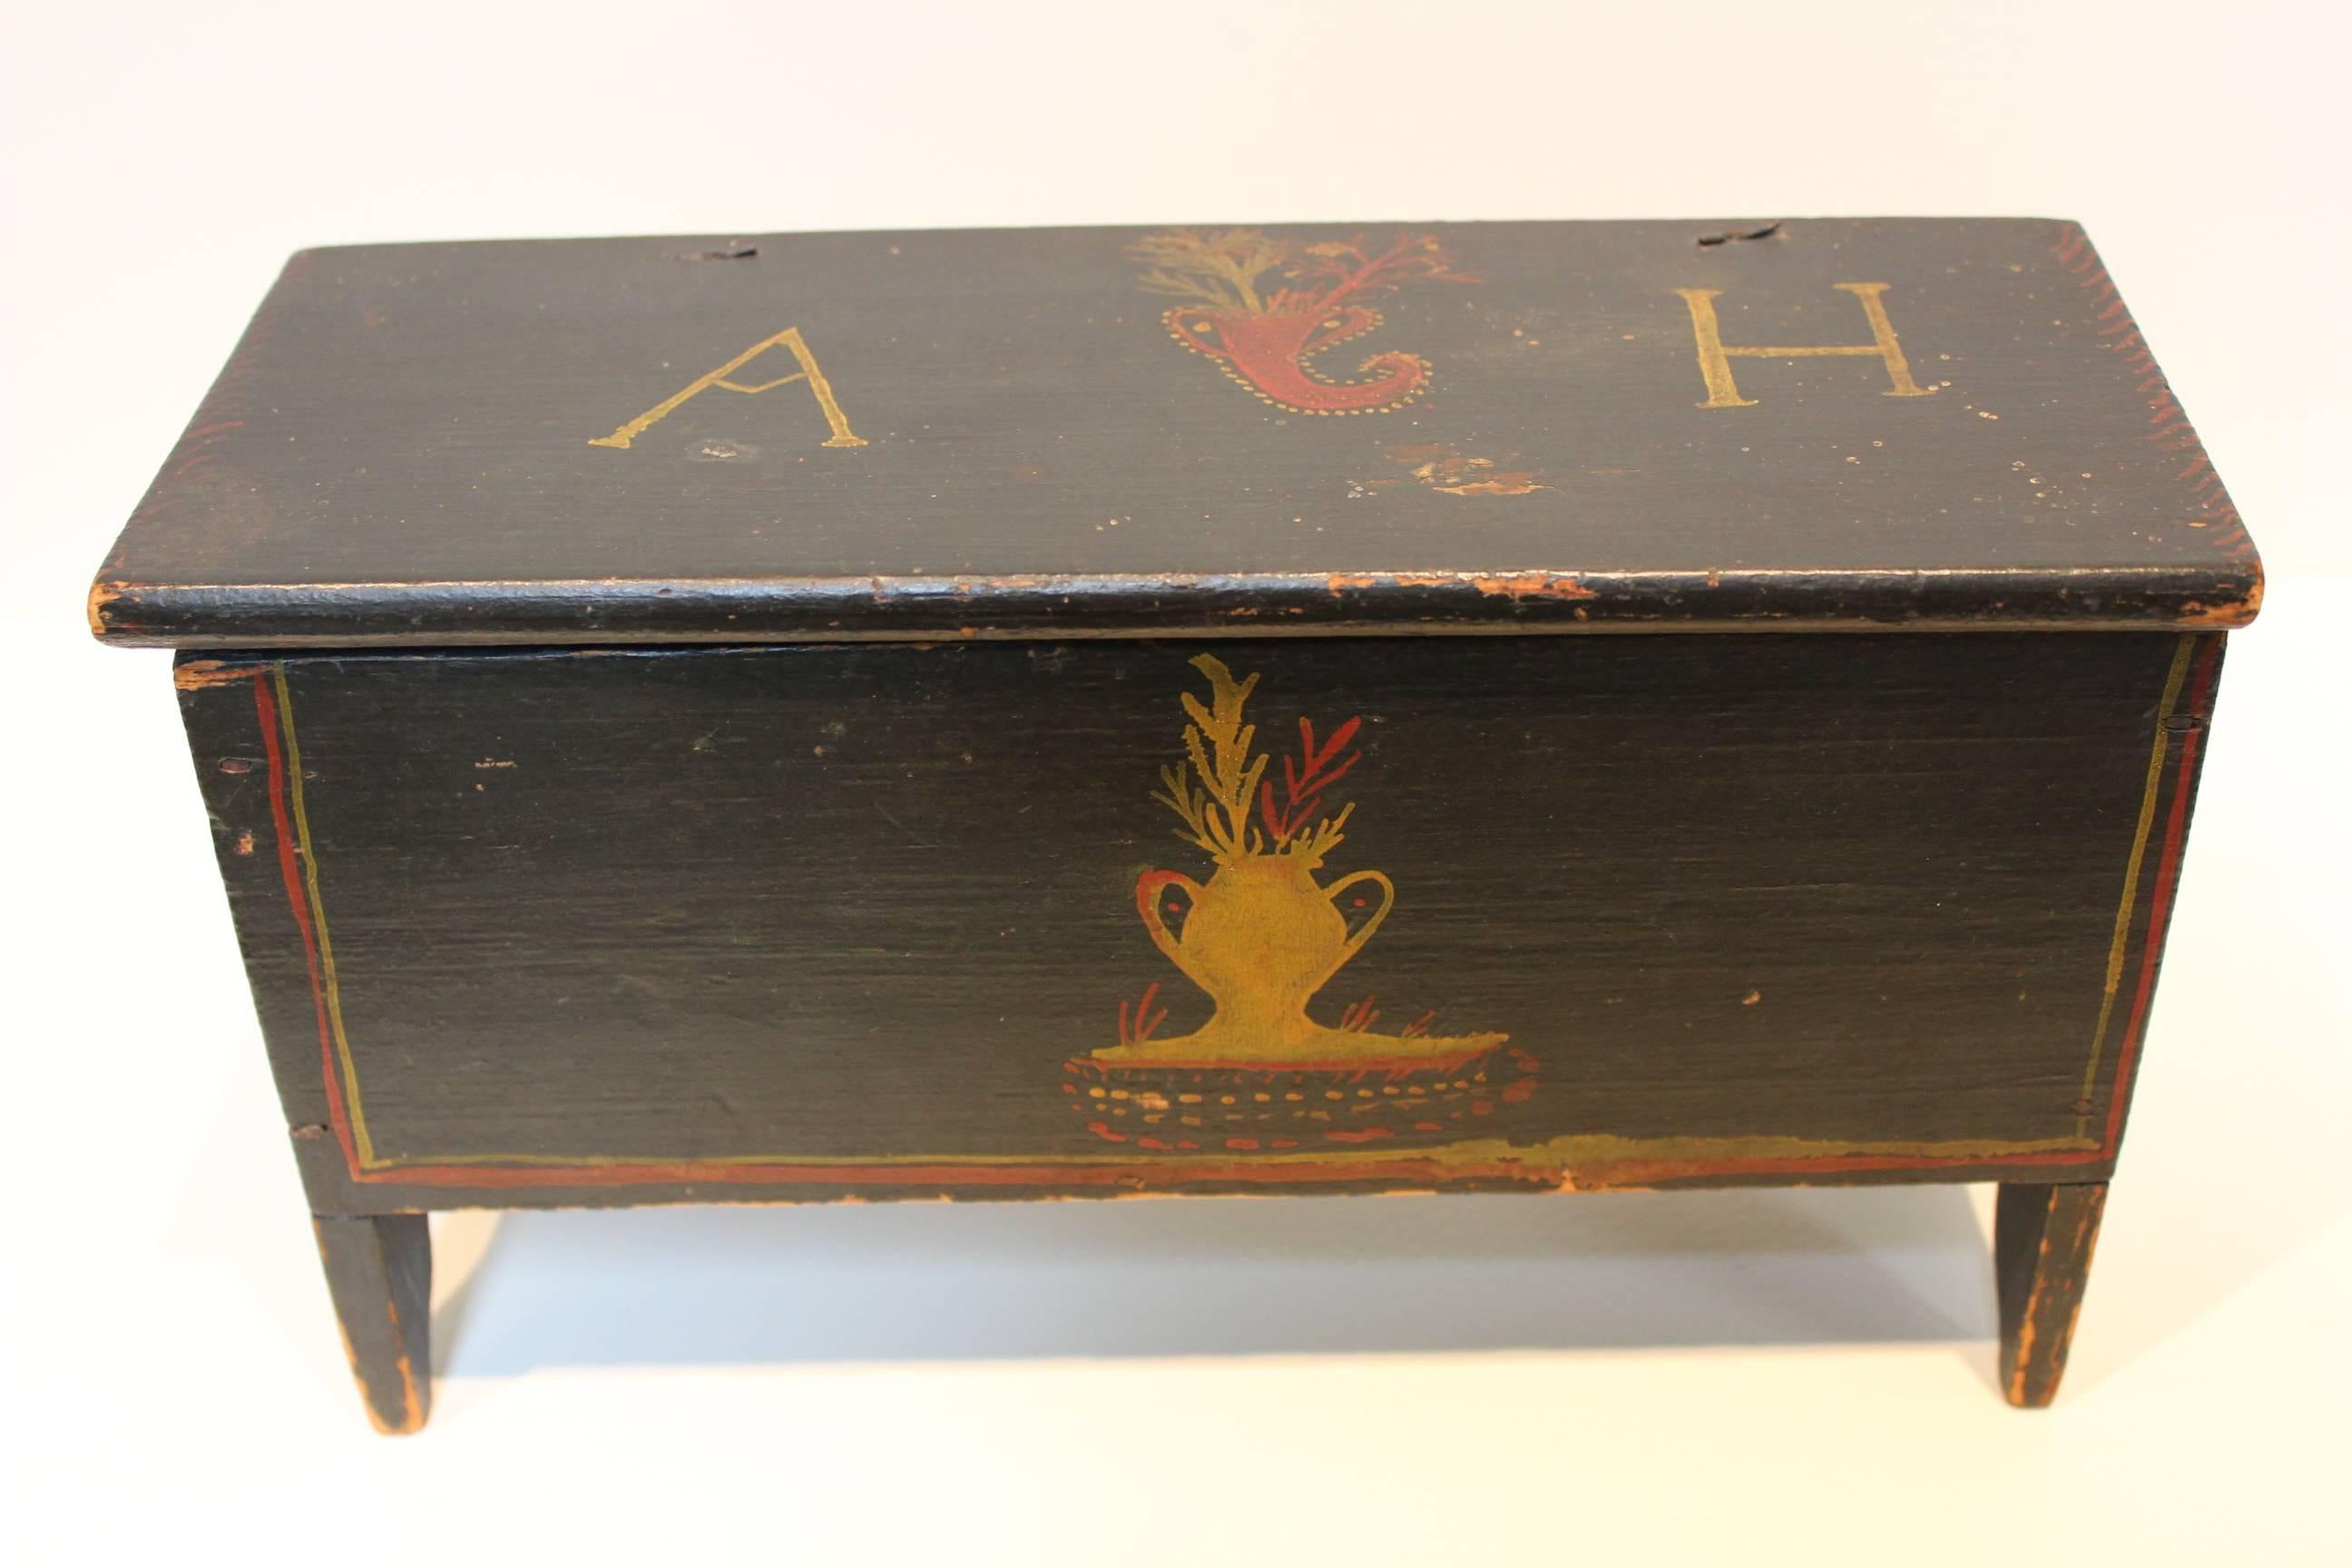 A charming New England miniature blanket chest constructed of pine with original yellow and red polychrome decoration on a dark blue navy ground. The lift-top lid bears the initials 'AH'.